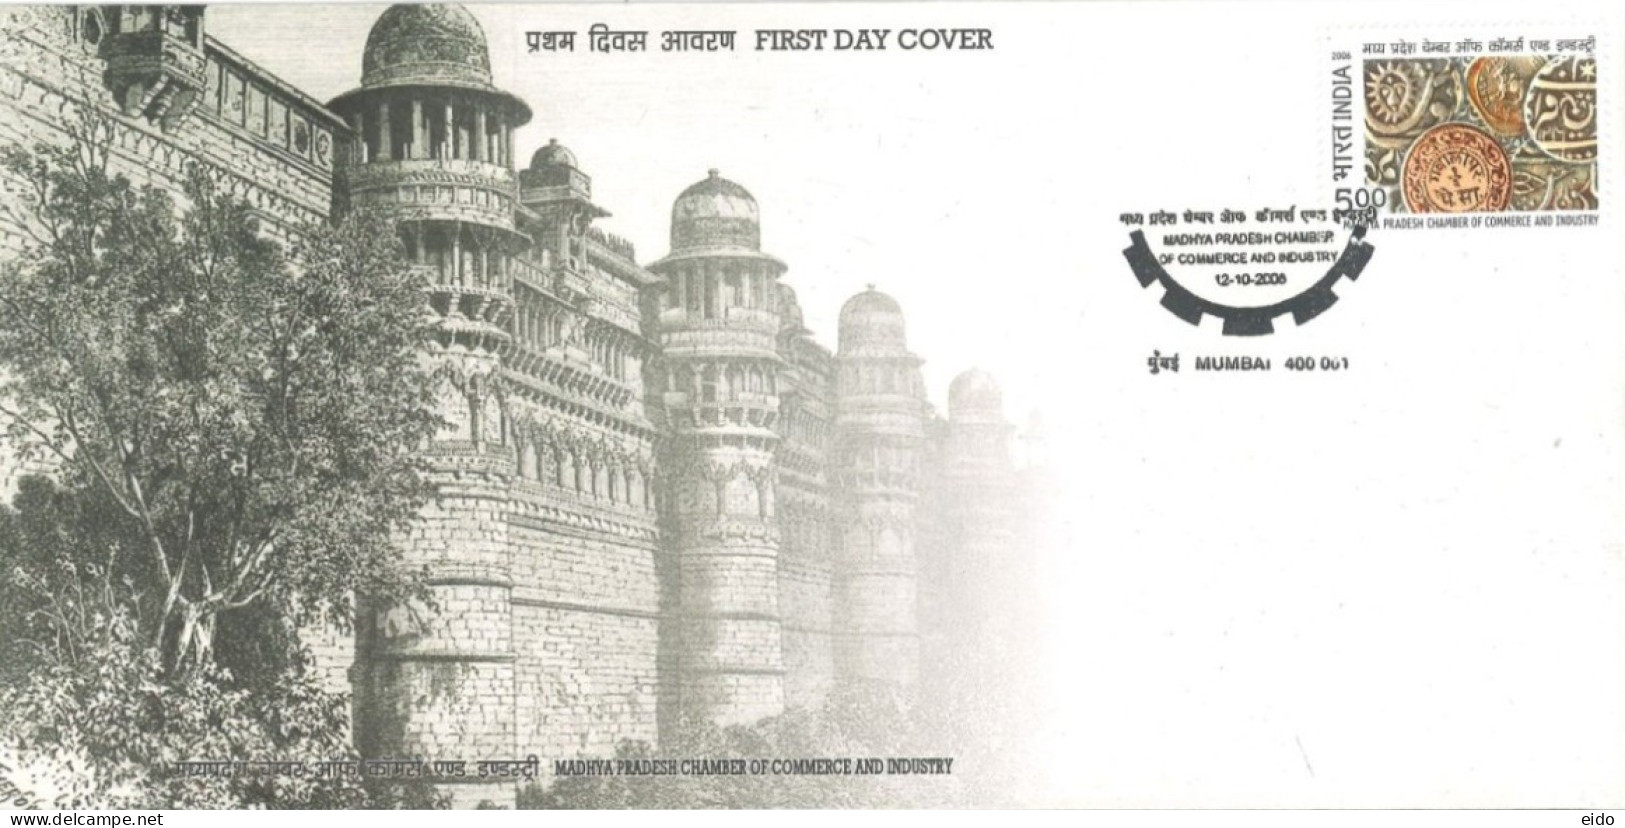 INDIA - 2006 - FDC STAMP OF MADHYA PRADESH CHAMBER OF COMMERCE AND INDUSTRY. - Covers & Documents